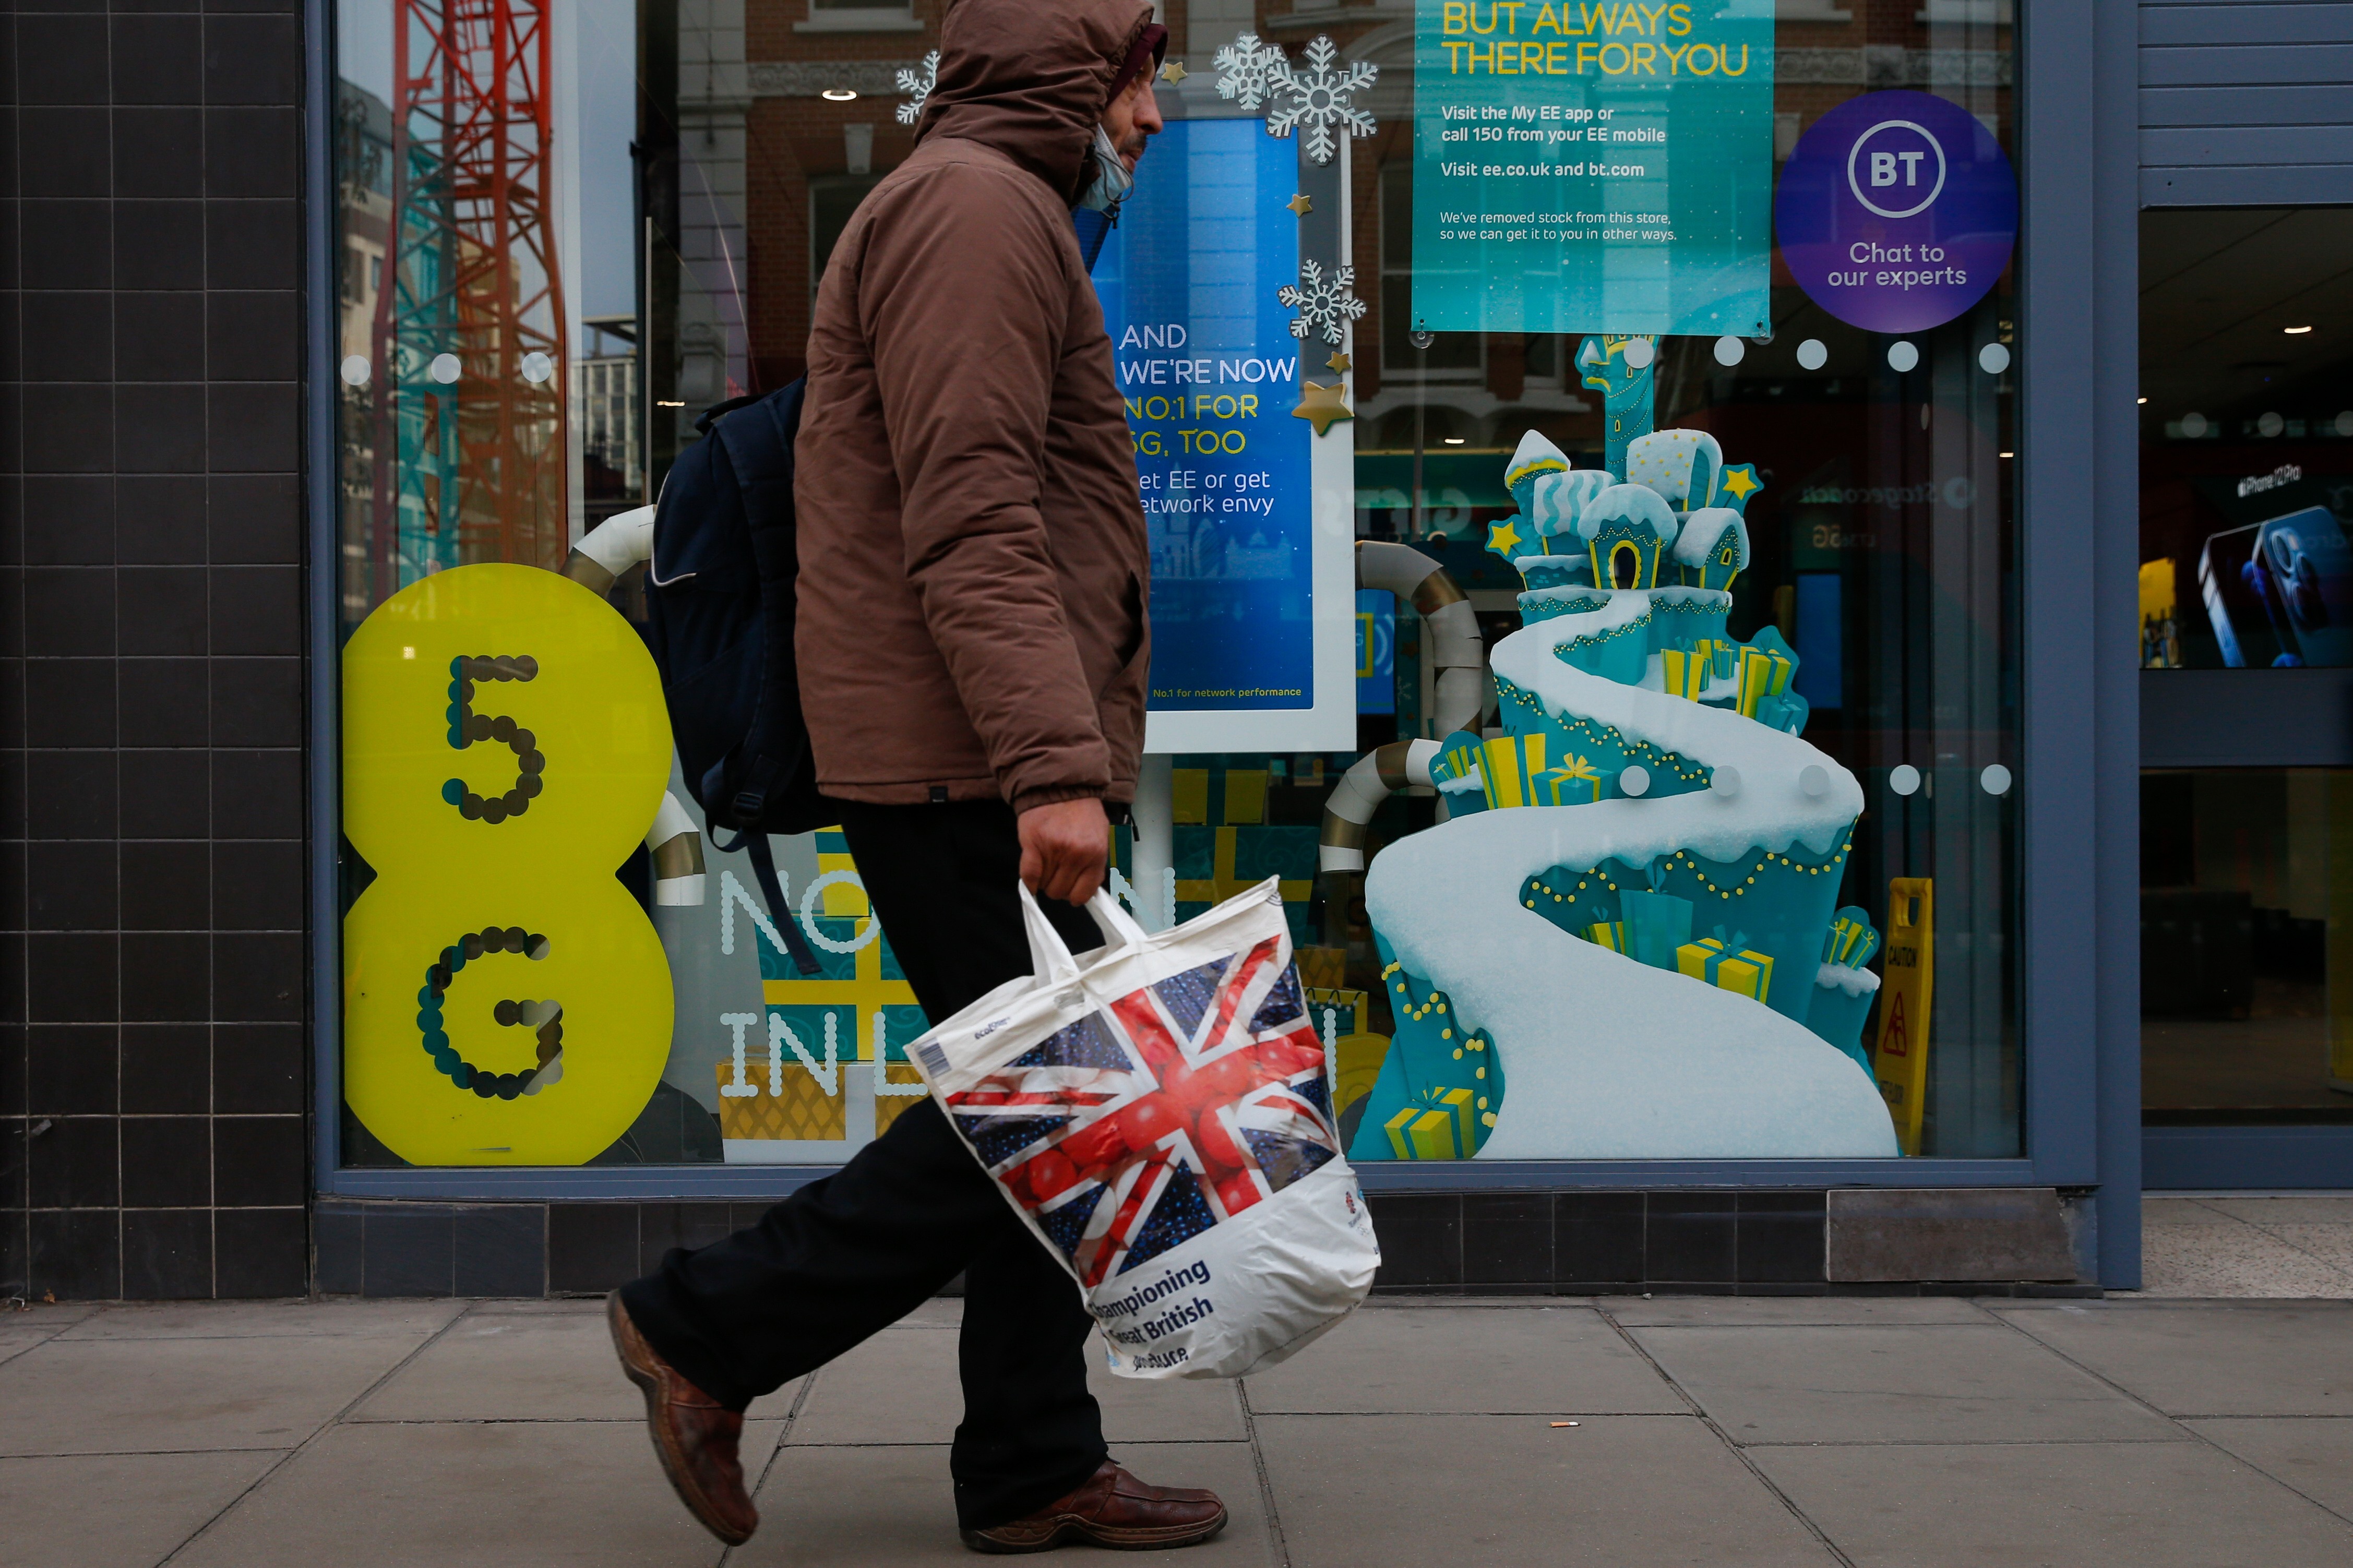 A pedestrian passes an EE store advertising 5G network capabilities in London, U.K., on Tuesday, Nov. 24, 2020. The U.K. is considering a ban on the installation of Huawei Technologies Co. 5G equipment as soon as next year to appease hawks pushing for tighter restrictions on the Chinese network equipment maker, according to people familiar with the matter. Photographer: Hollie Adams/Bloomberg